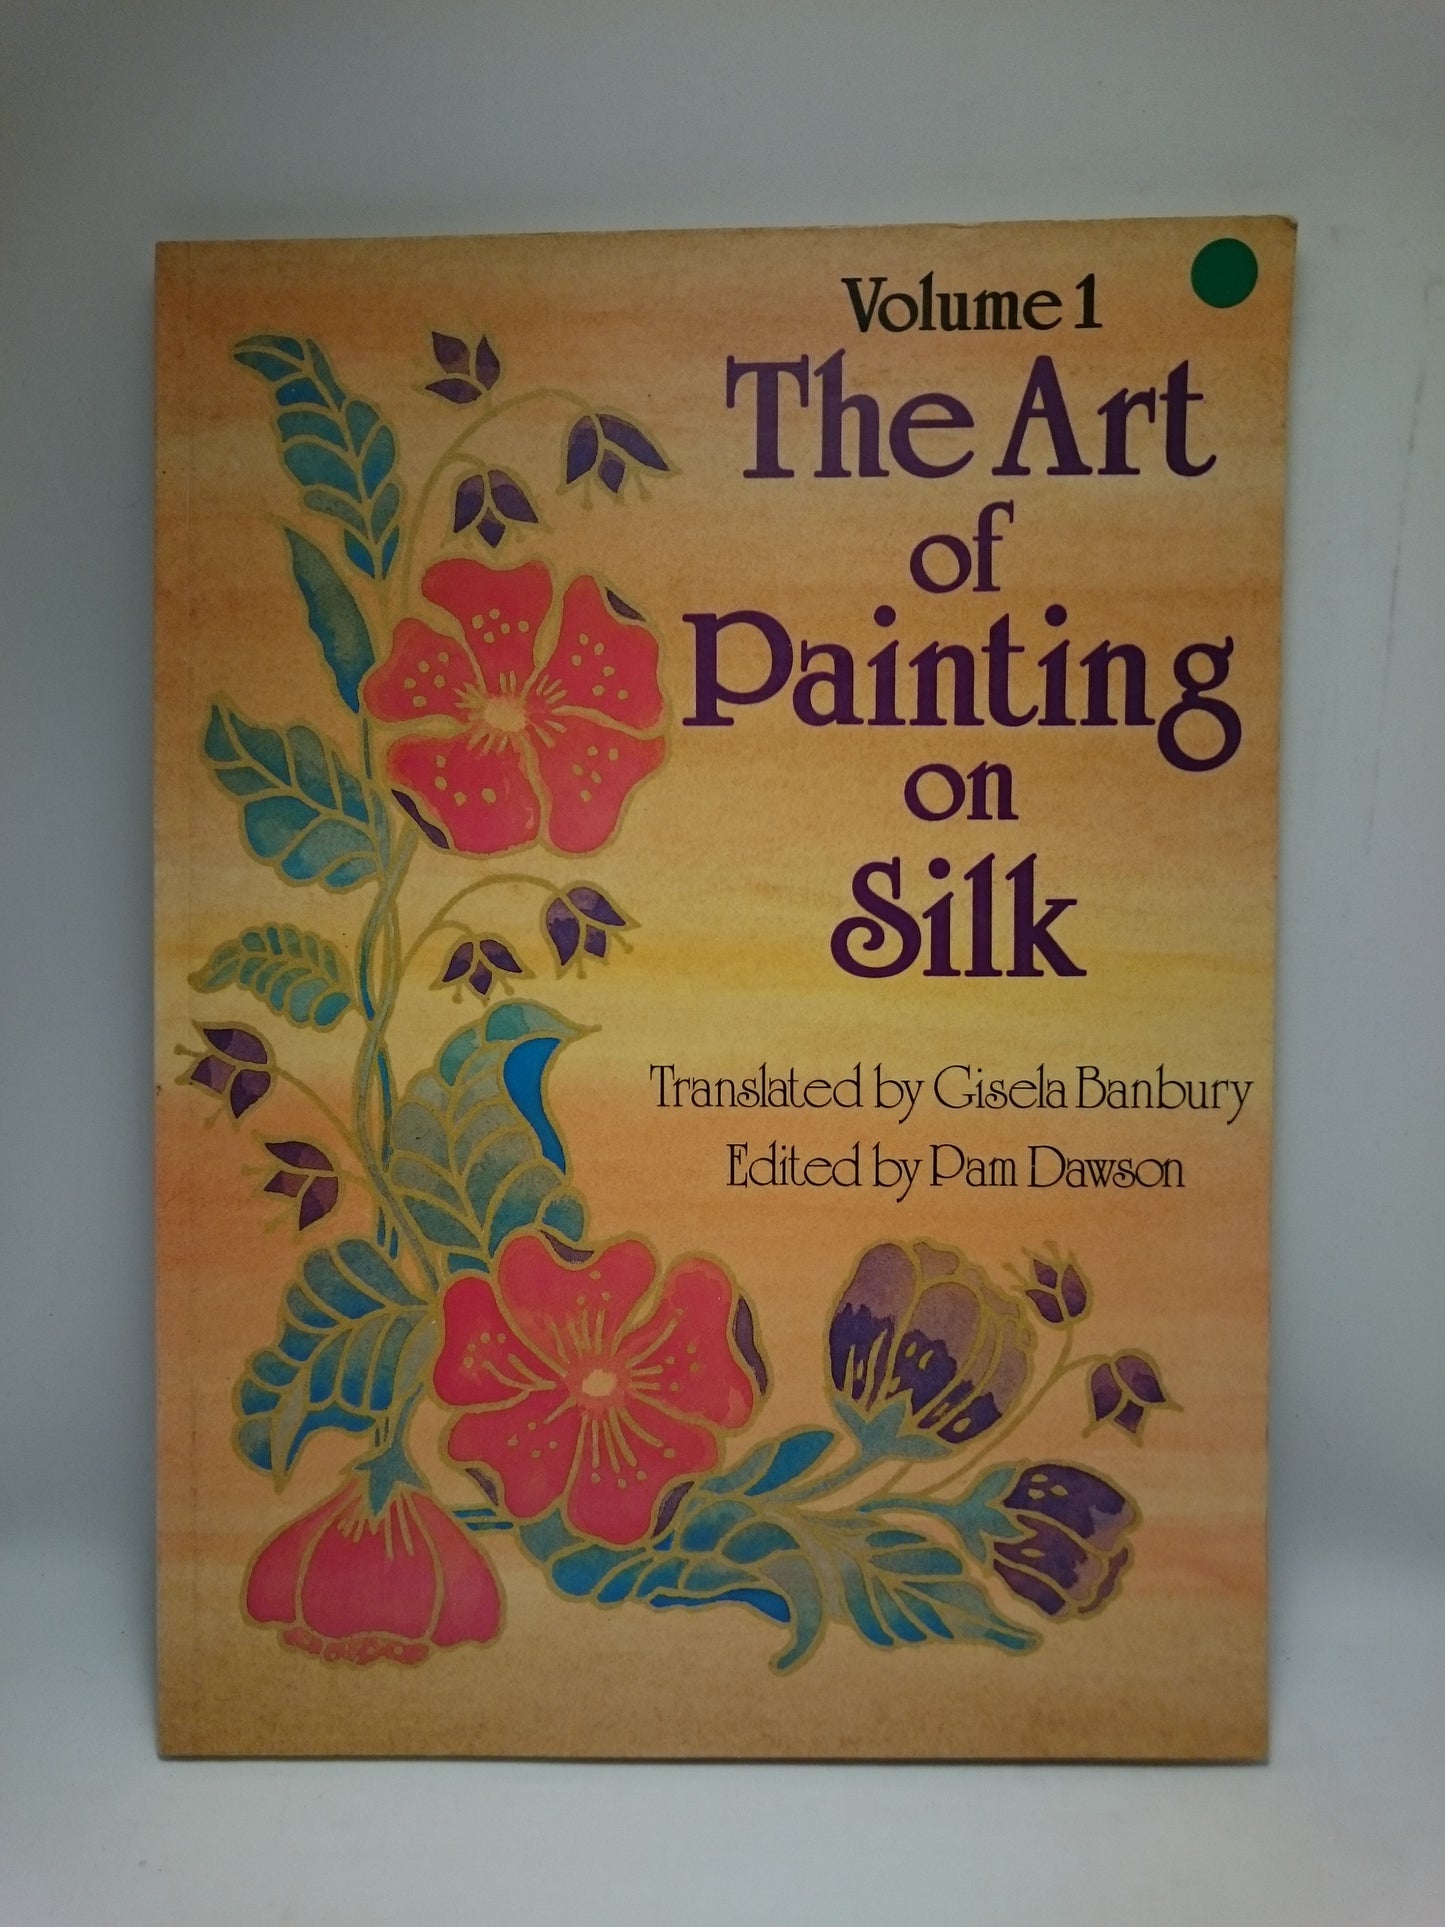 The Art of Painting on Silk